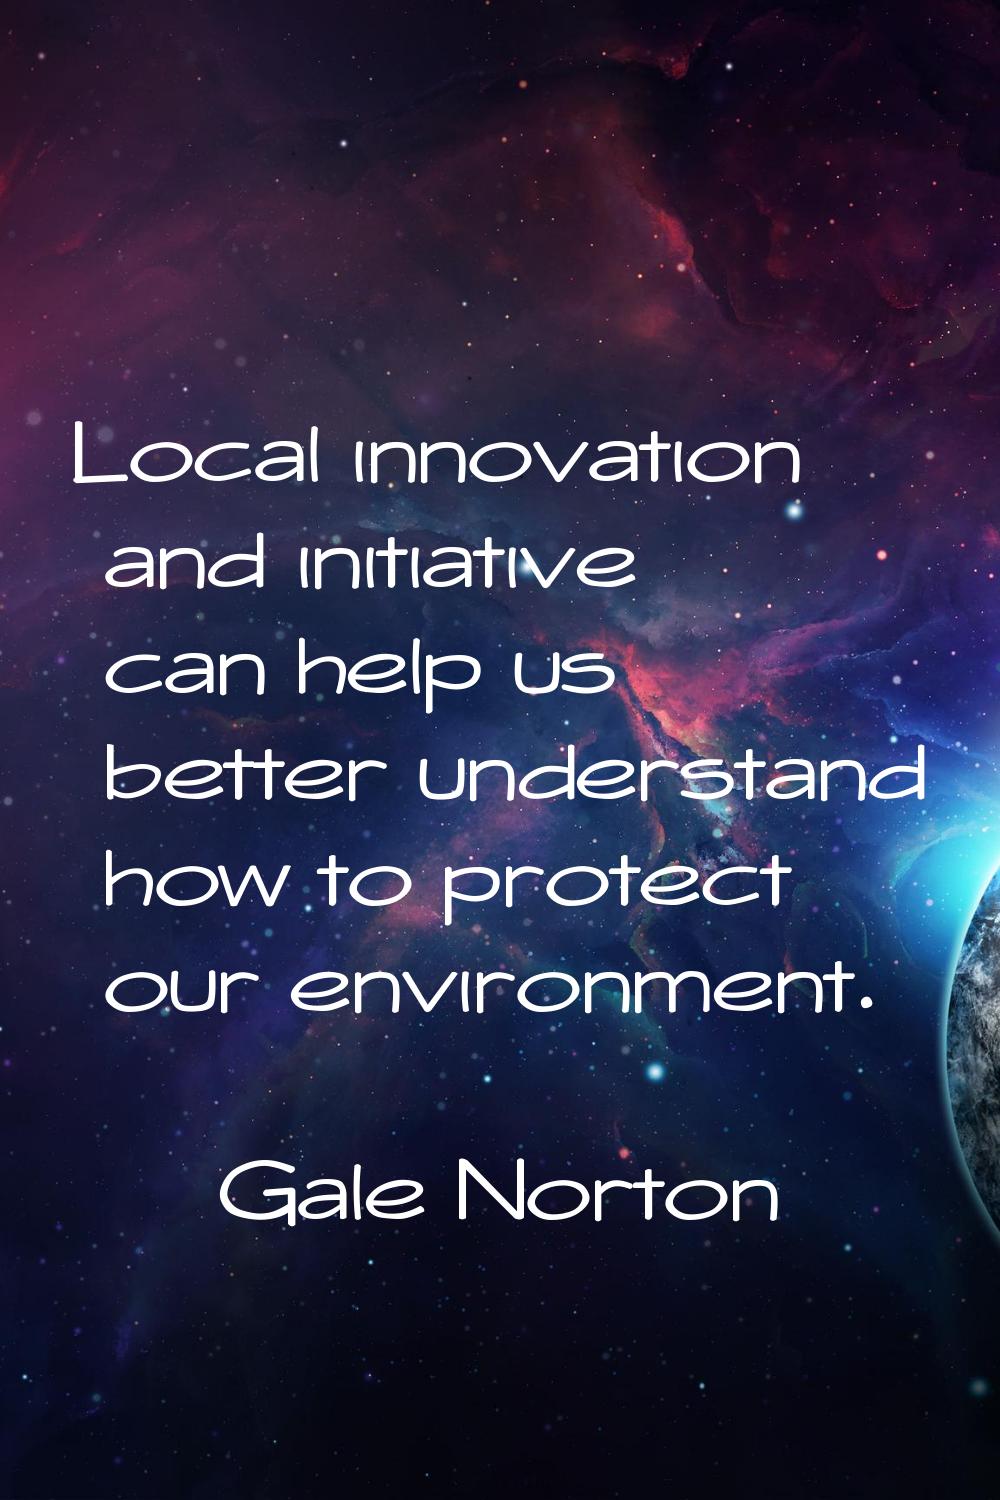 Local innovation and initiative can help us better understand how to protect our environment.